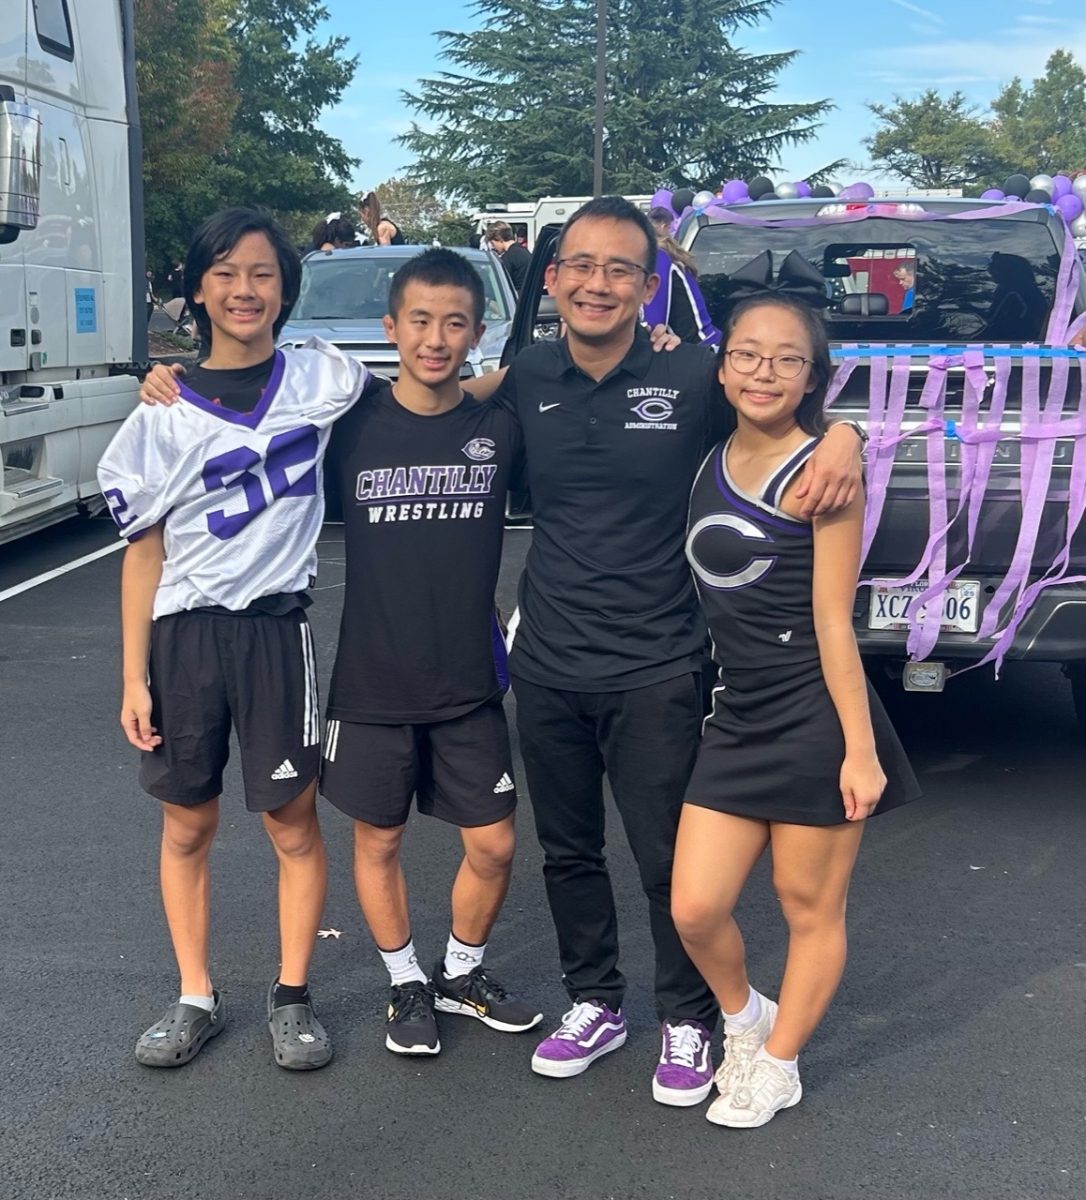 Assistant+principal+Jihoon+Shin+and+his+three+children%2C+freshman+Tyler++Shin%2C+sophomore+Carter+Shin+and+sophomore+Reagan+Shin+participate+in+the+homecoming+activities+on+Oct.+6.%0A%0A